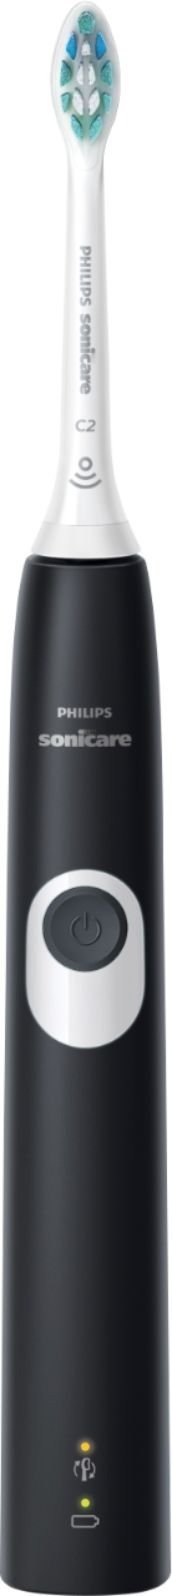 Philips Sonicare ProtectiveClean 4100 温和清洁款电动牙刷